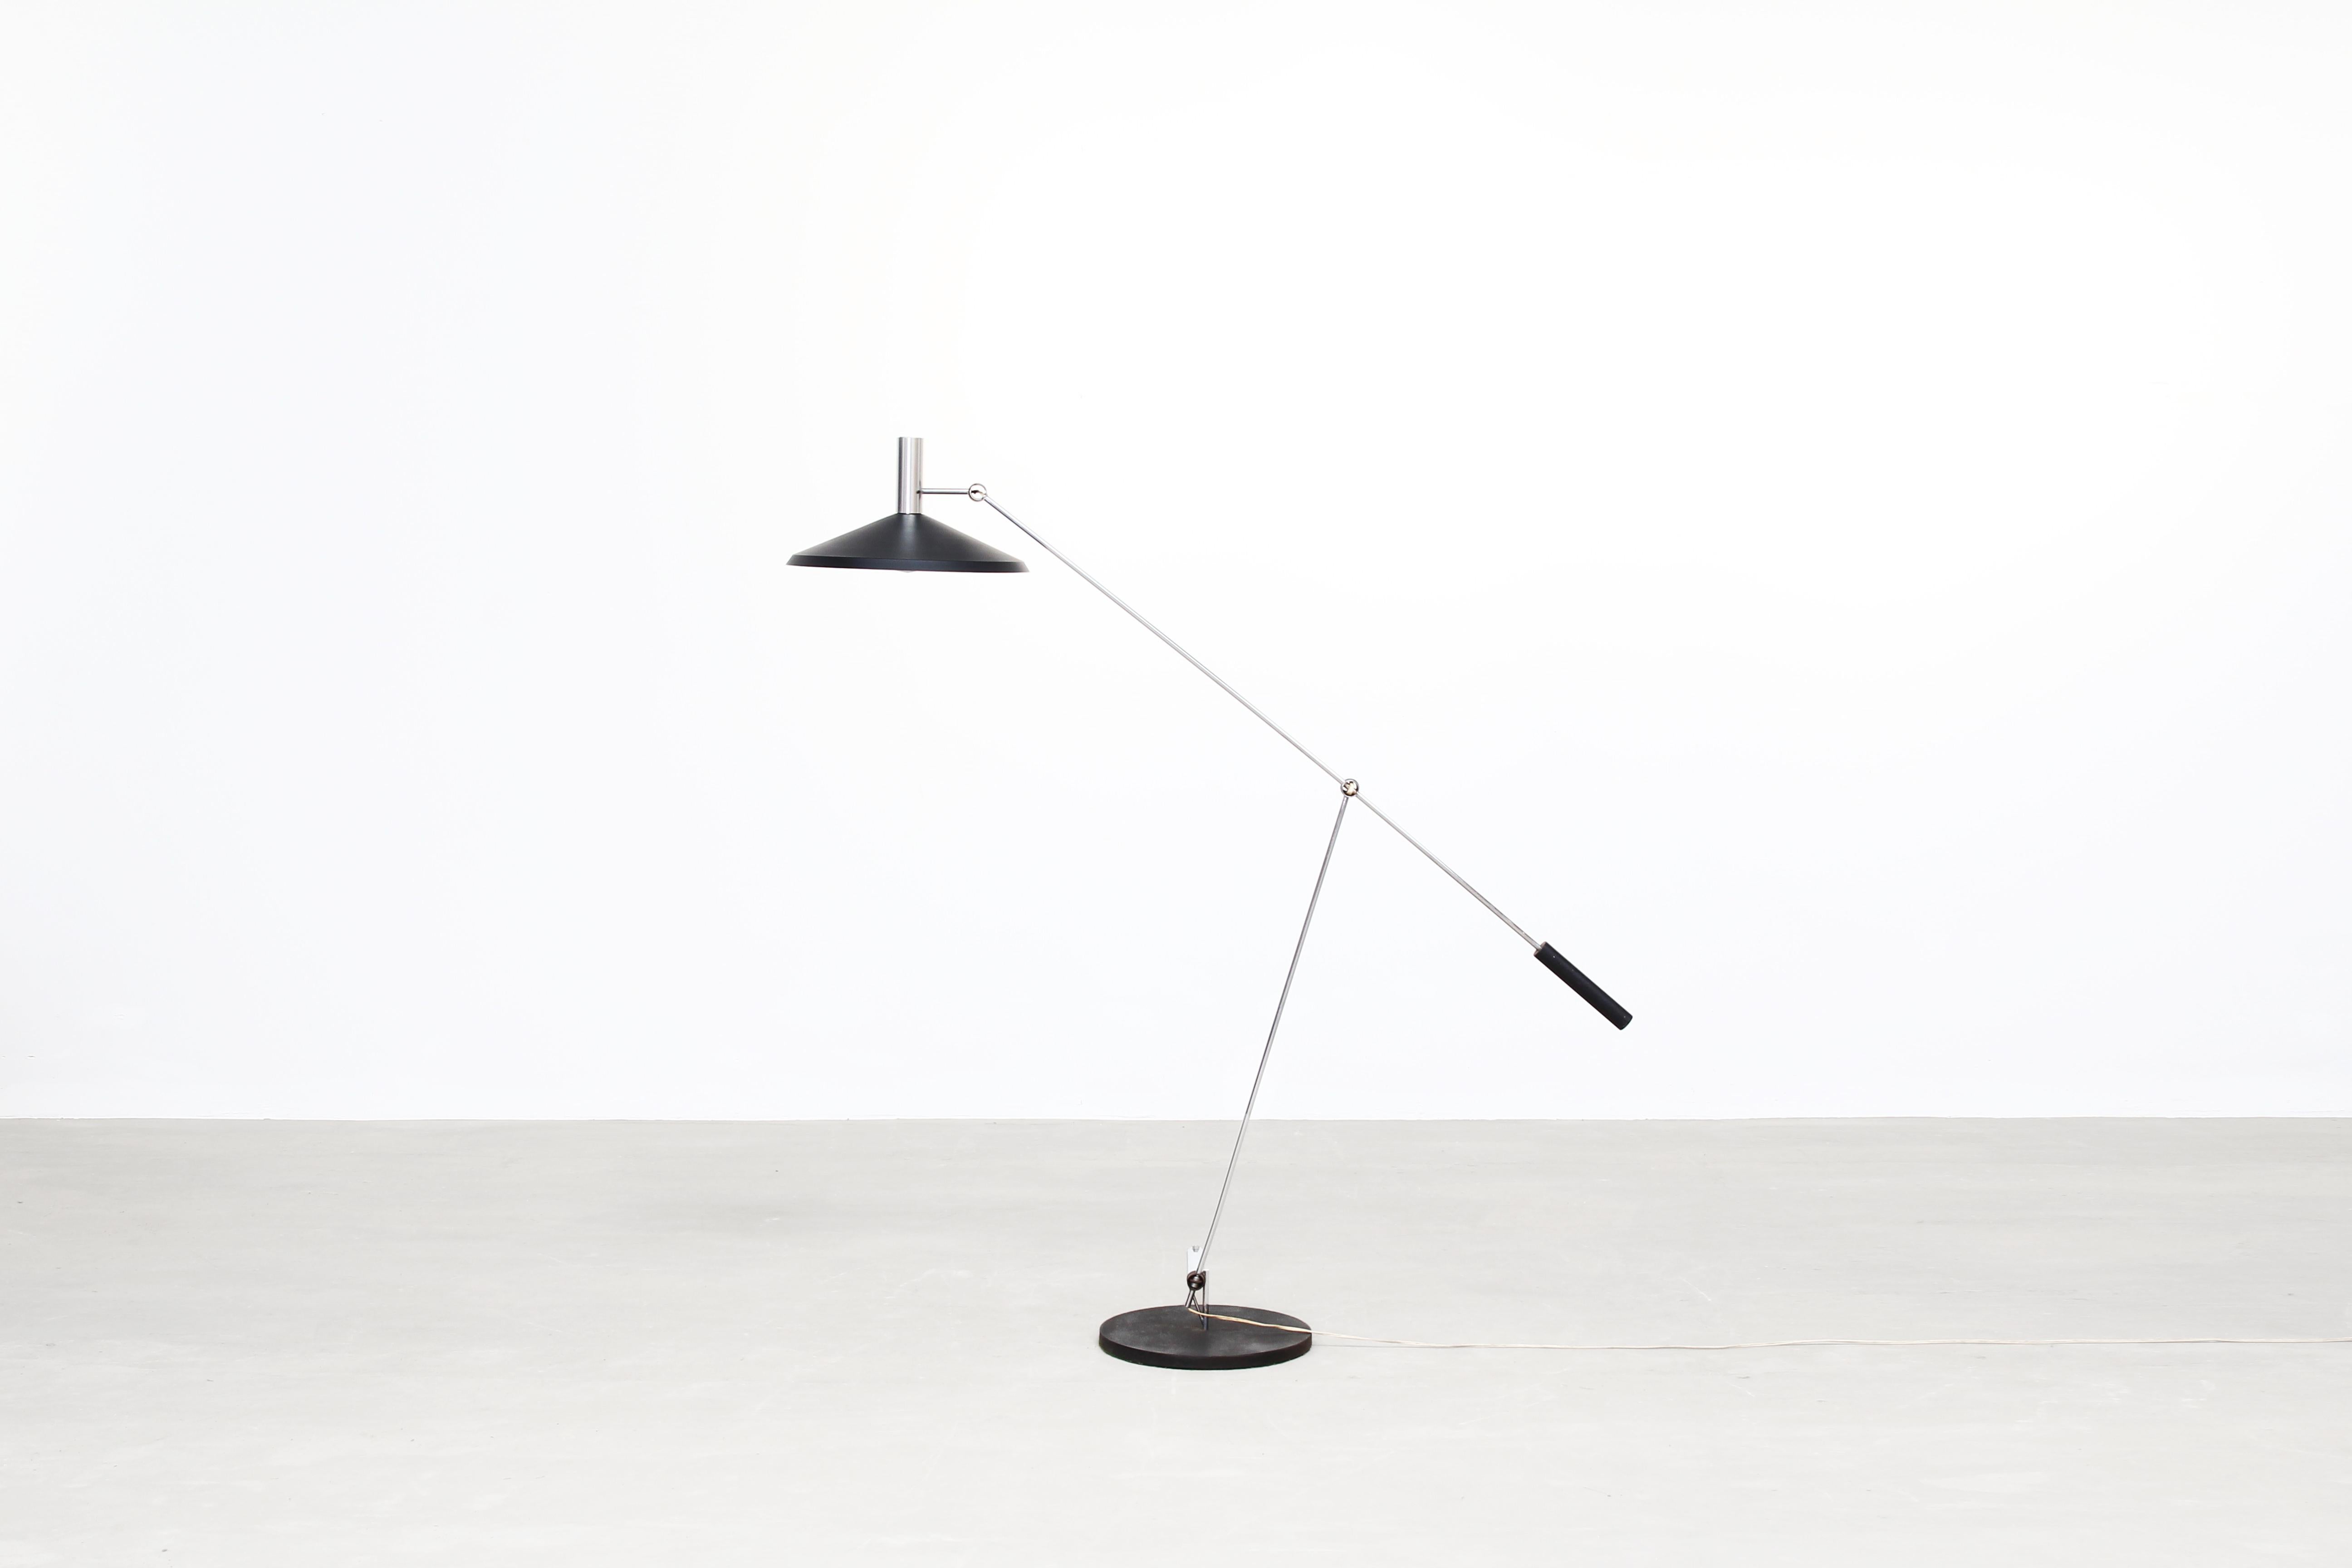 Very beautiful floor lamp designed by Rico & Rosmarie Baltensweiler.
Articulated floor lamp designed by Rosmarie Lamp and Rico Baltensweiler equipped with a counter weight system. The lamp can be posed in various positions and comes in lacquered